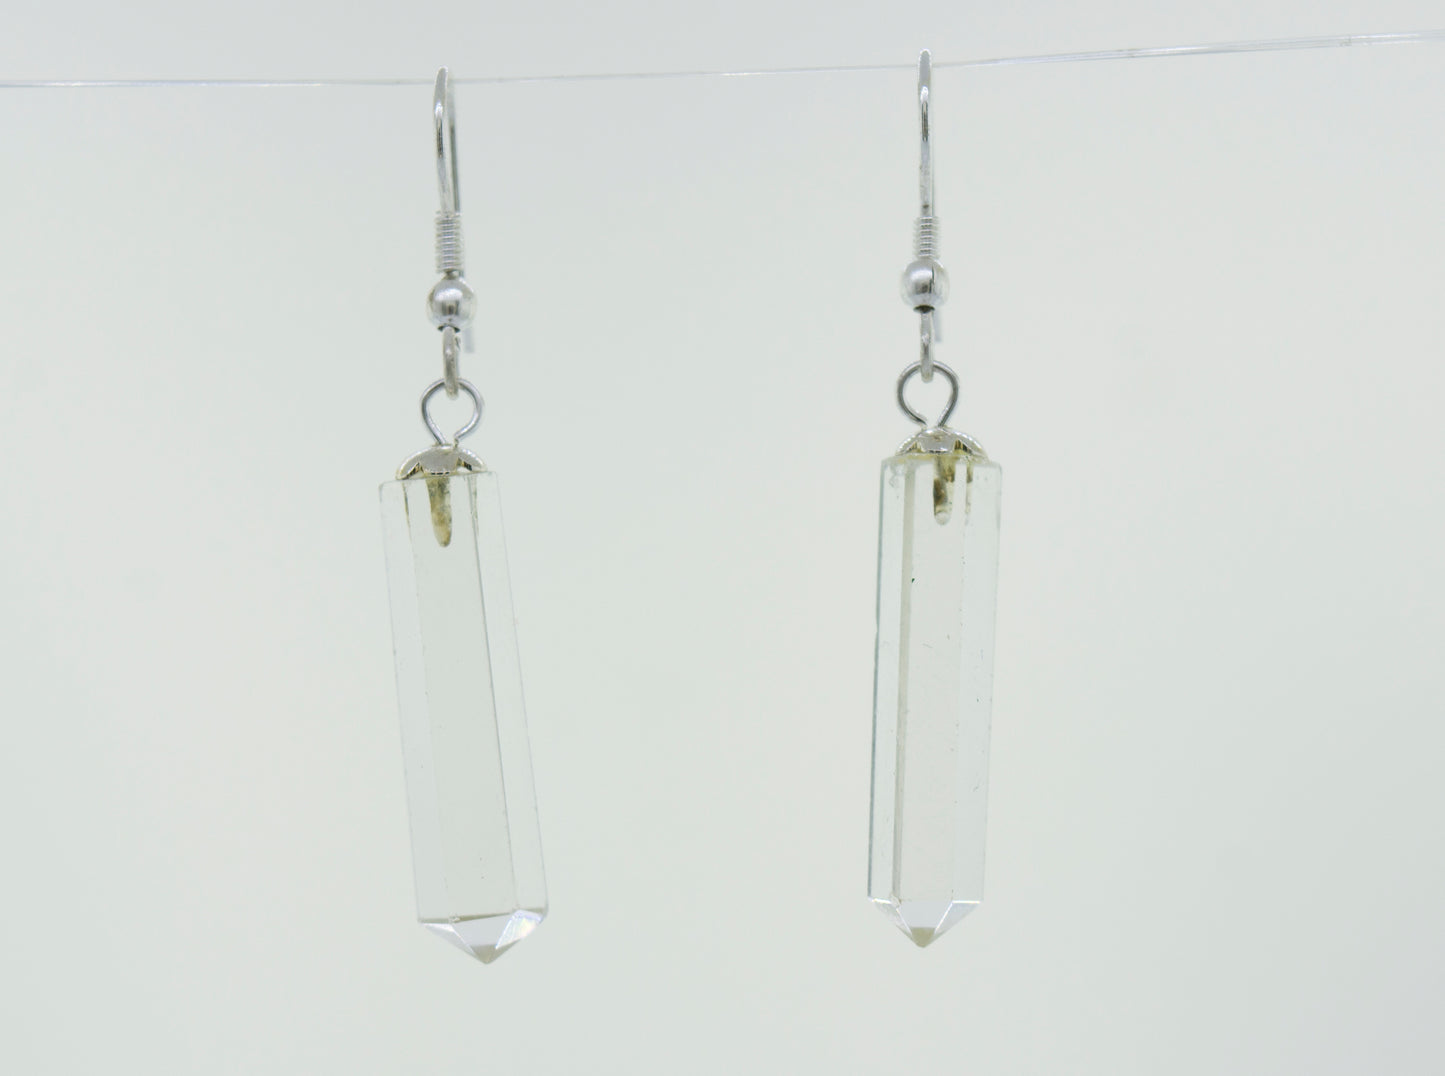 A pair of minimalist Super Silver Raw Stone Earrings in an obelisk shape, hanging from a wire.